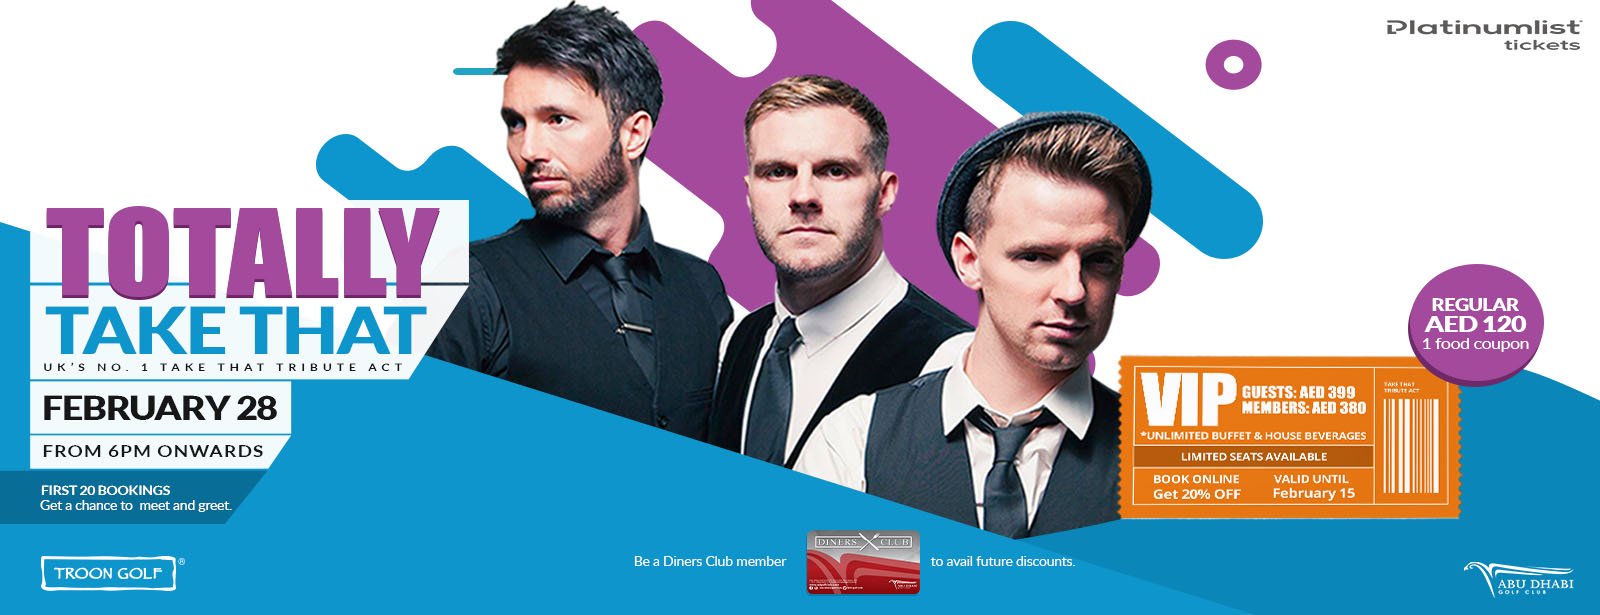 Totally Take That Tribute Concert - Coming Soon in UAE